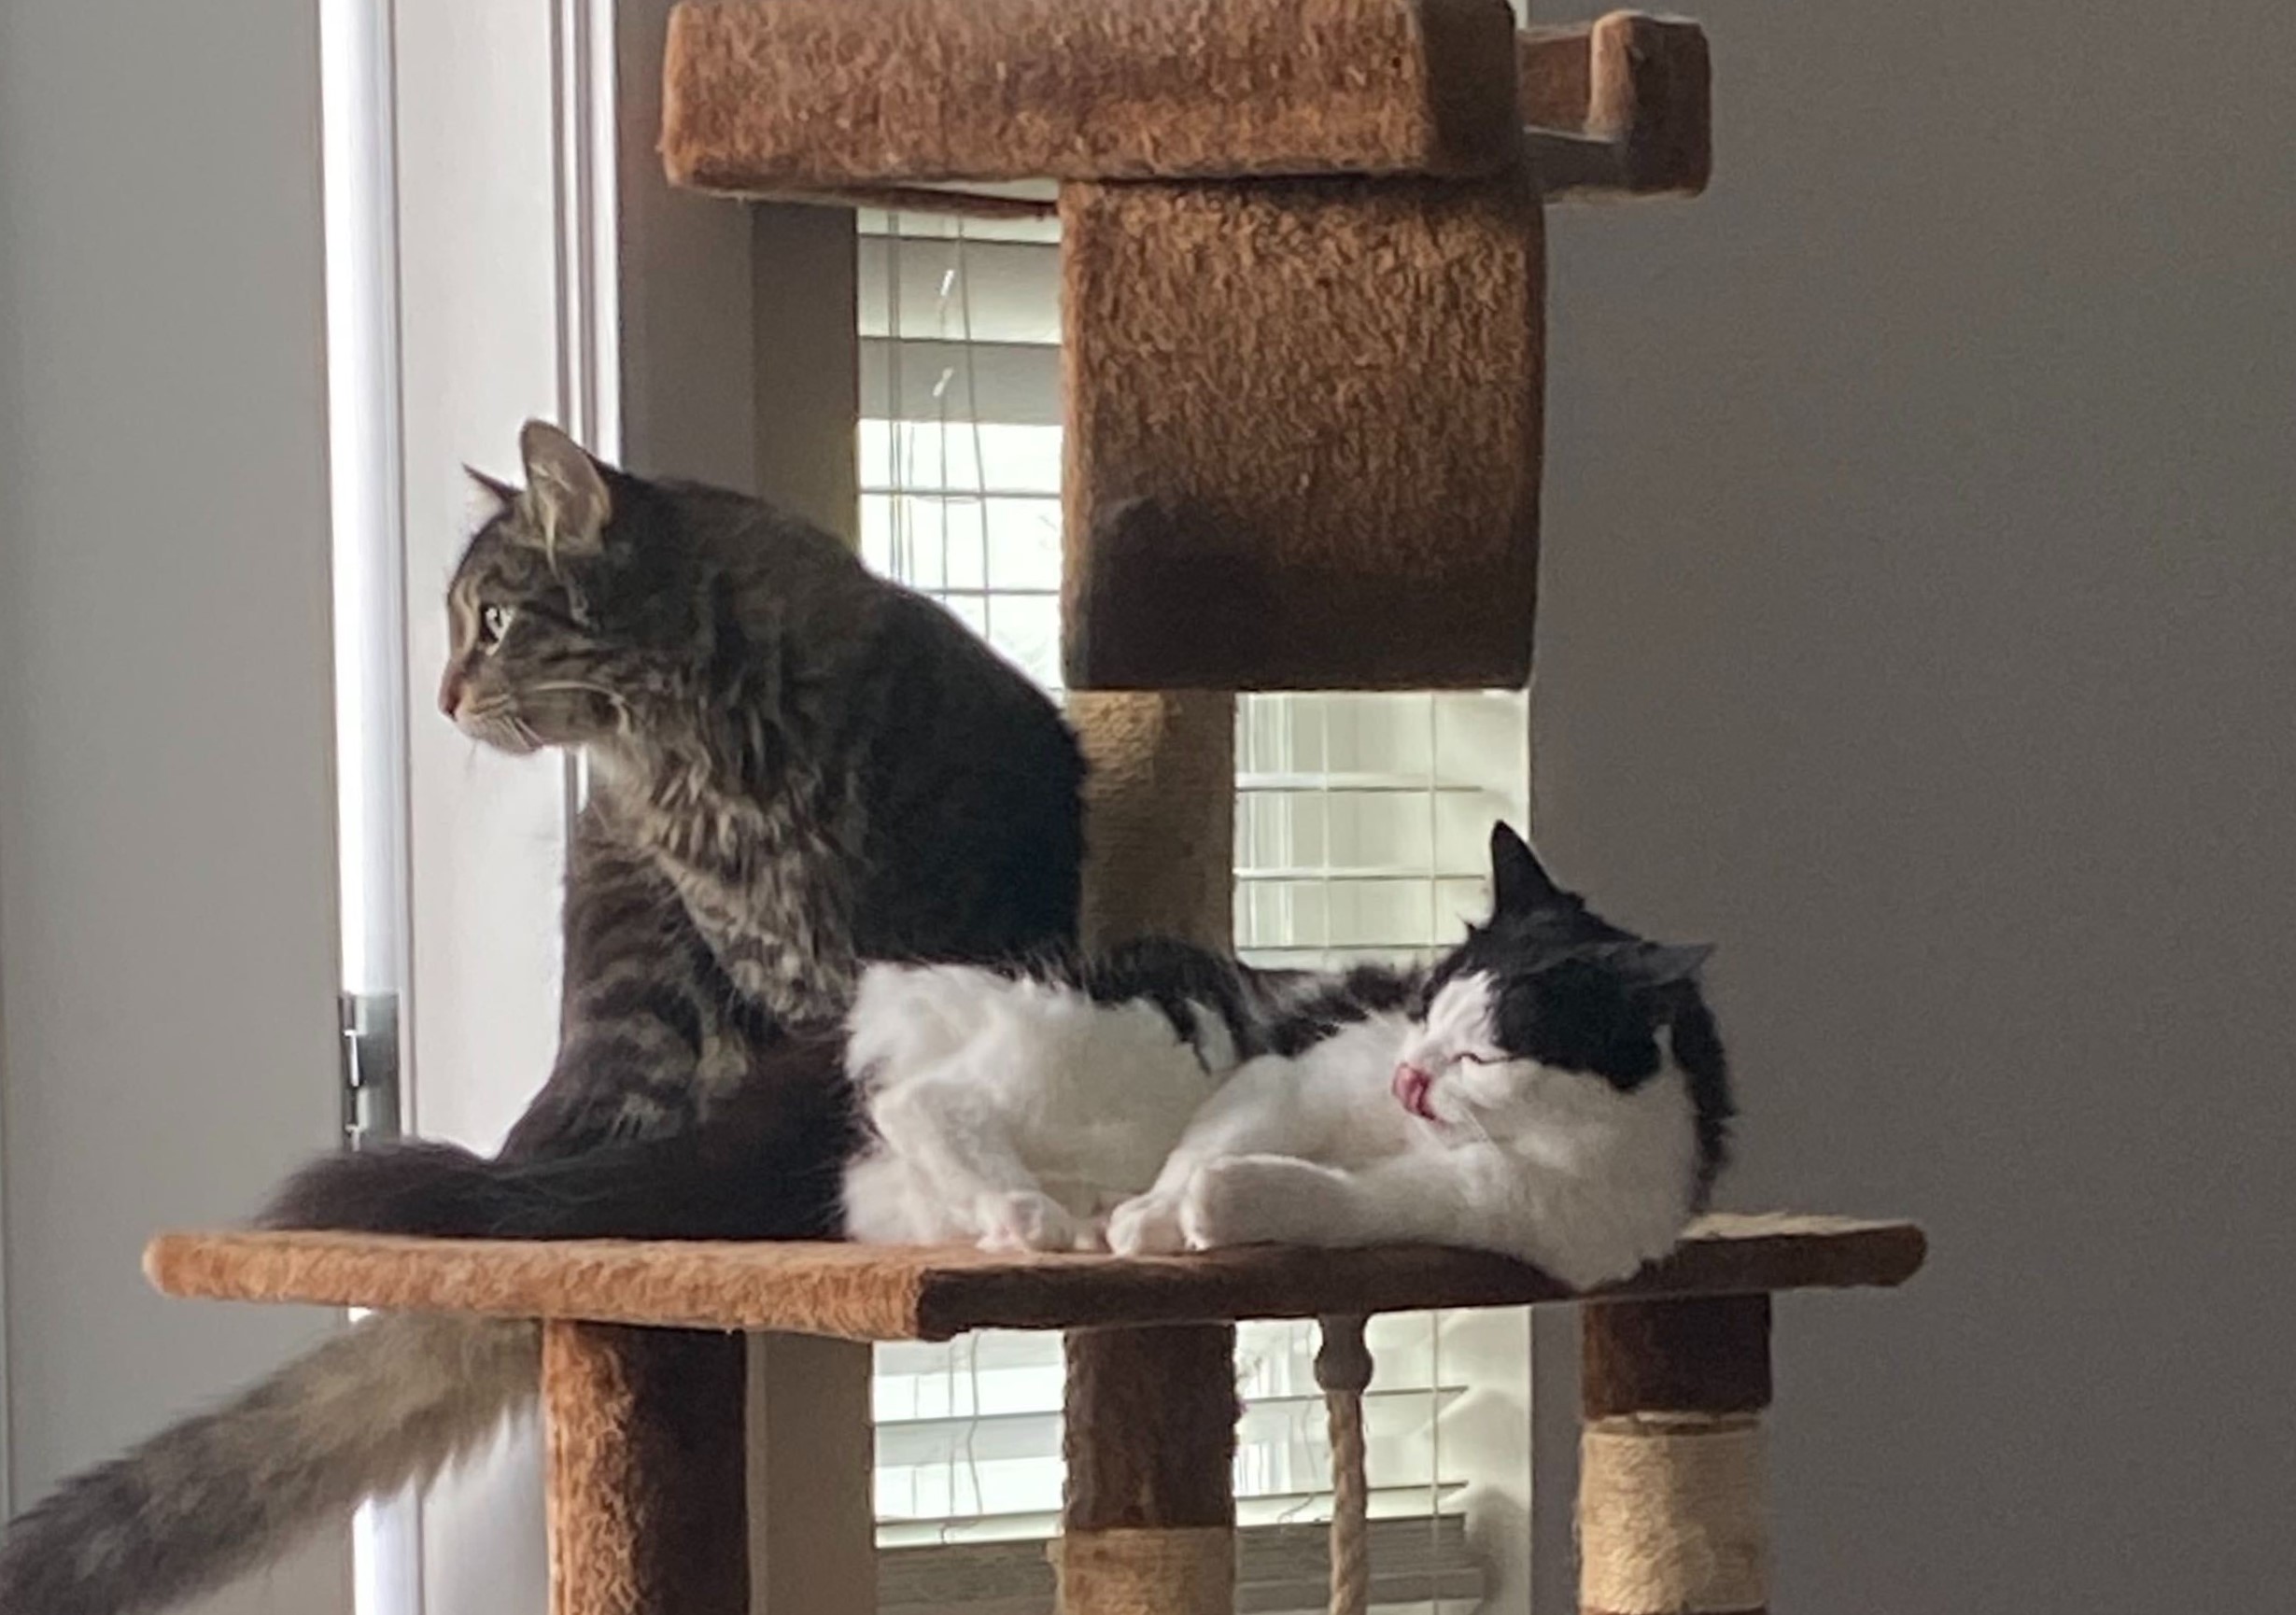 Pet-friendly construction has enabled two cats to rest comfortably on their cat tree.